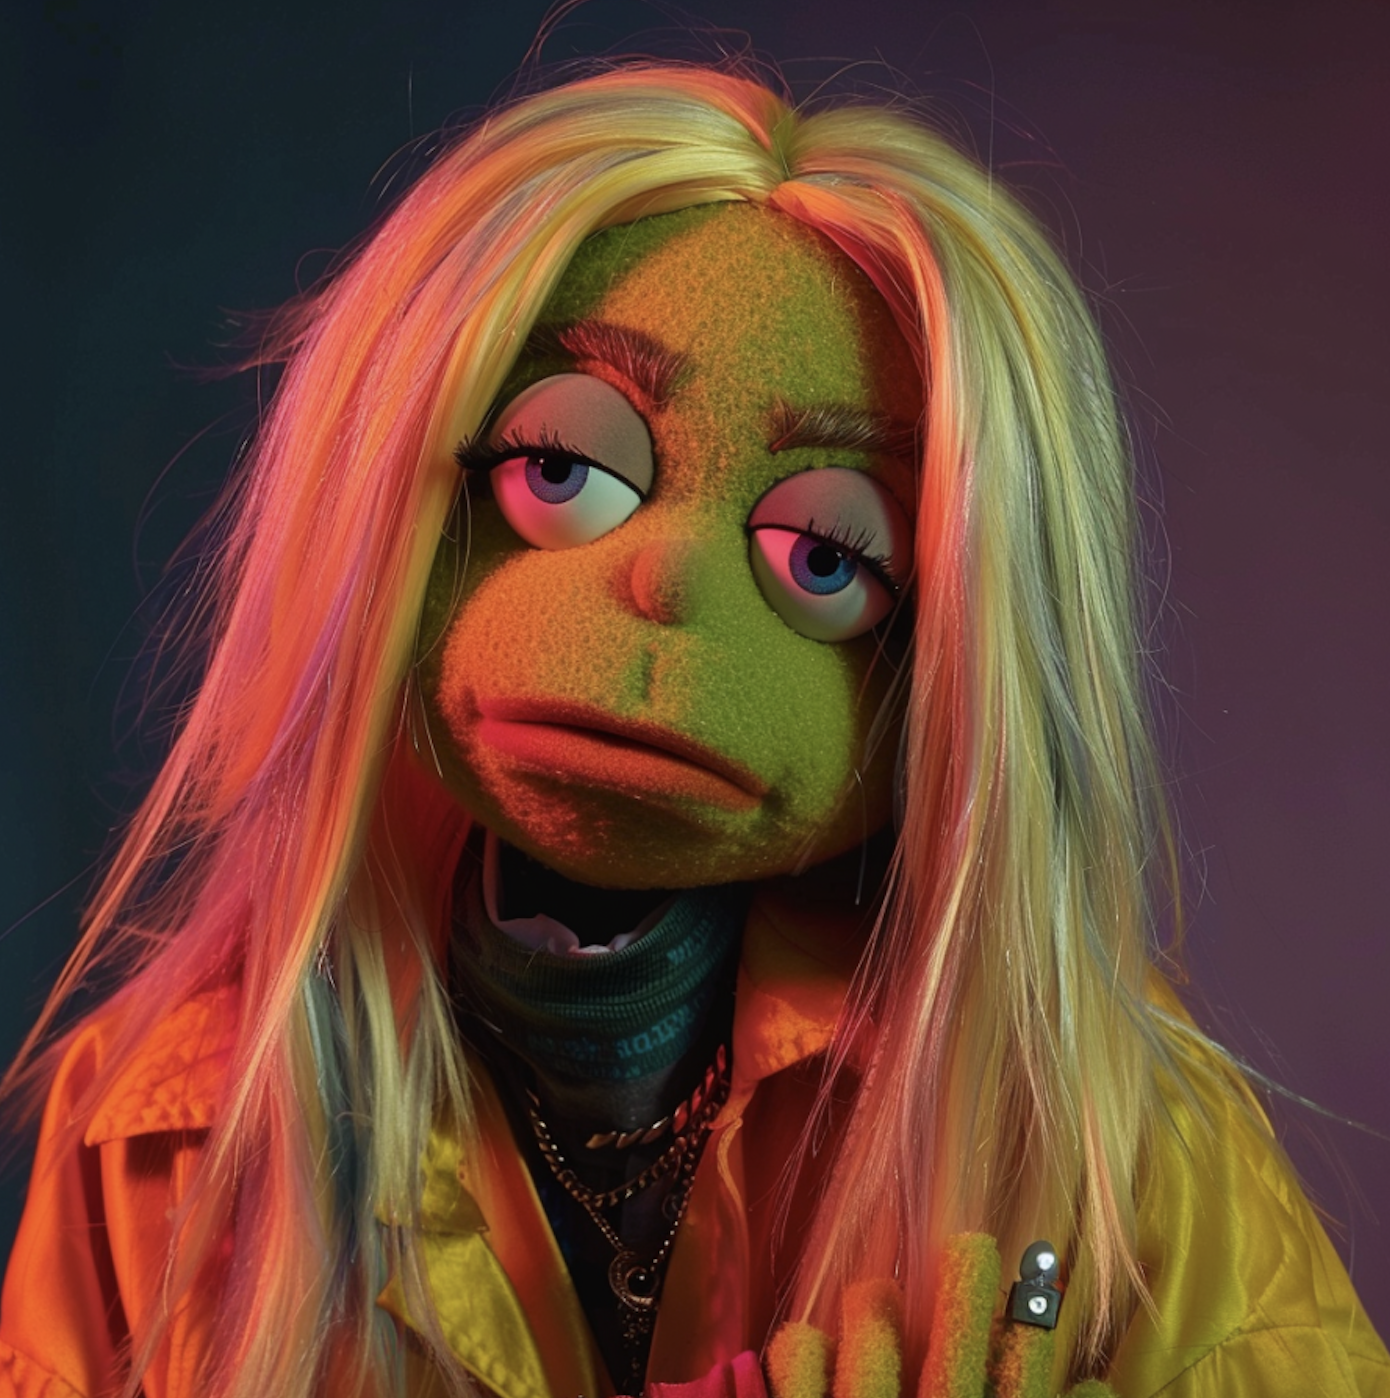 A Muppet with long blonde hair, wearing a yellow jacket and jewelry and looking sad and sleepy